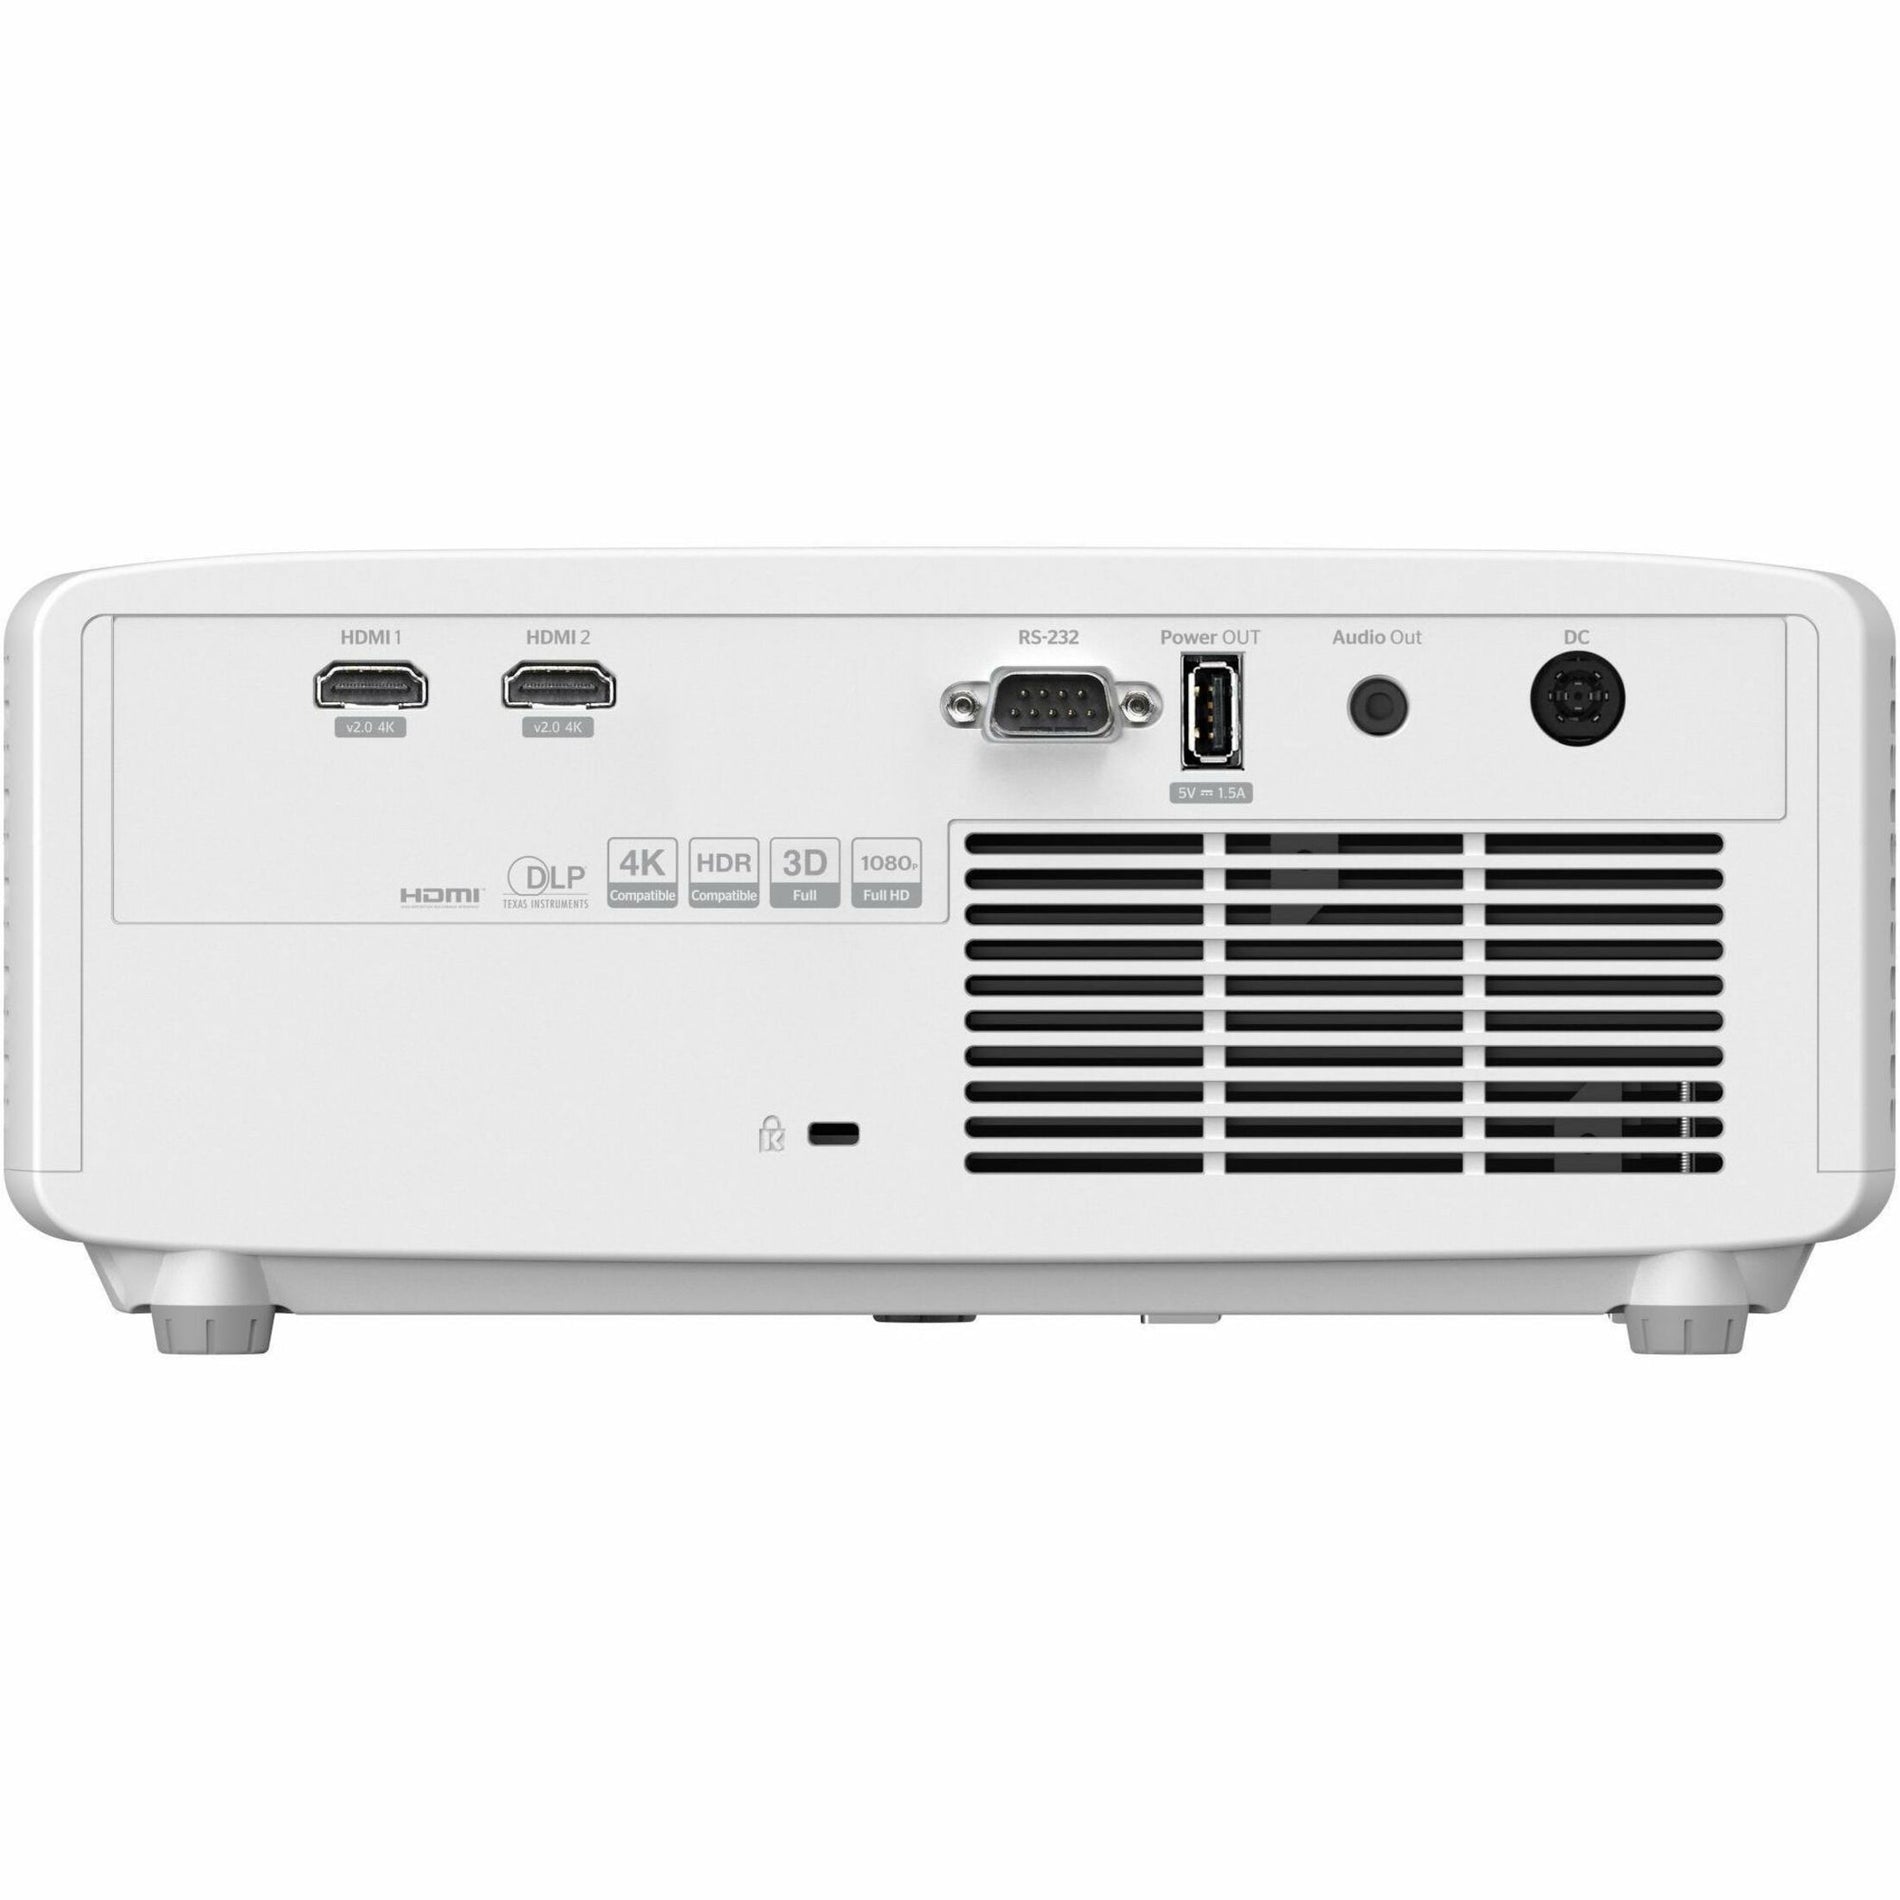 Optoma 4000 lumen 1080p HDR DuraCore Laser DLP projector (HZ40HDR)